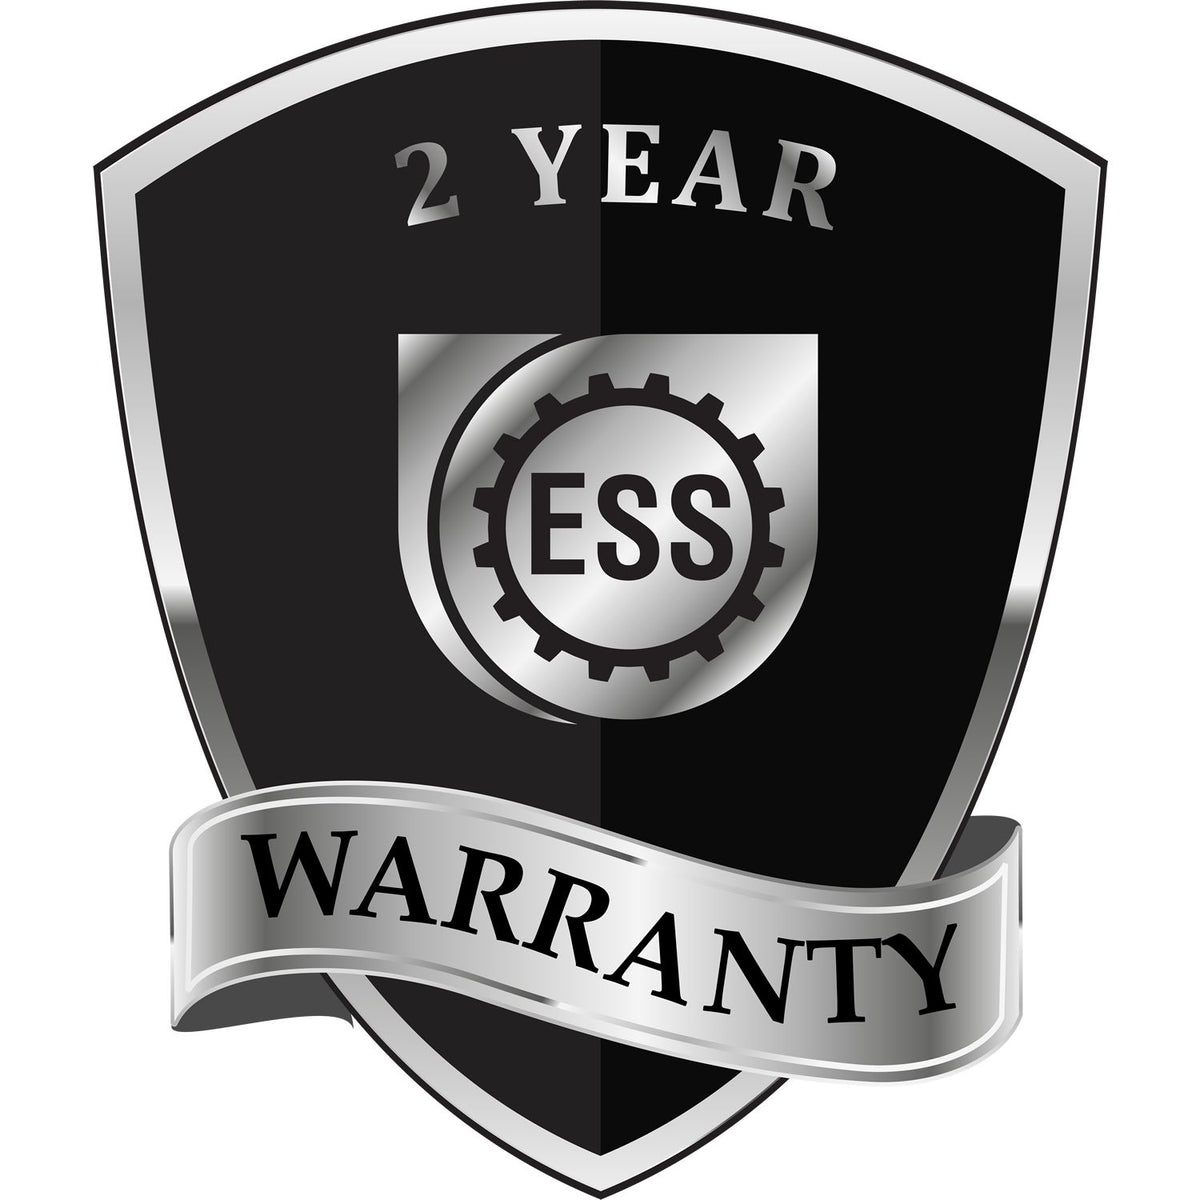 A black and silver badge or emblem showing warranty information for the Gift Maine Architect Seal